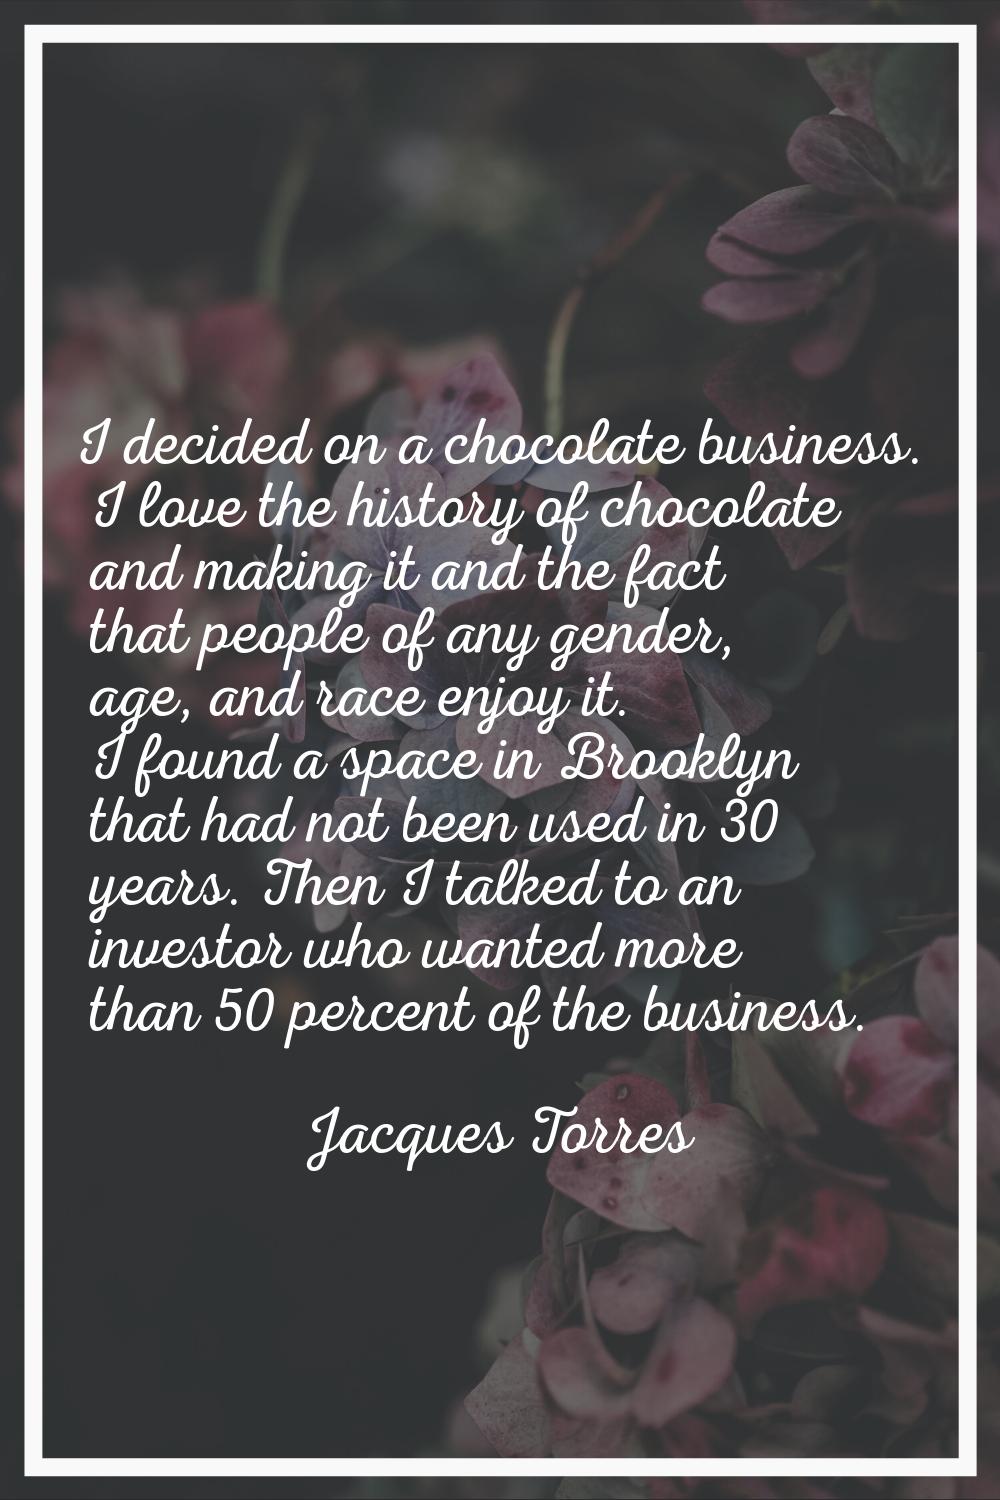 I decided on a chocolate business. I love the history of chocolate and making it and the fact that 